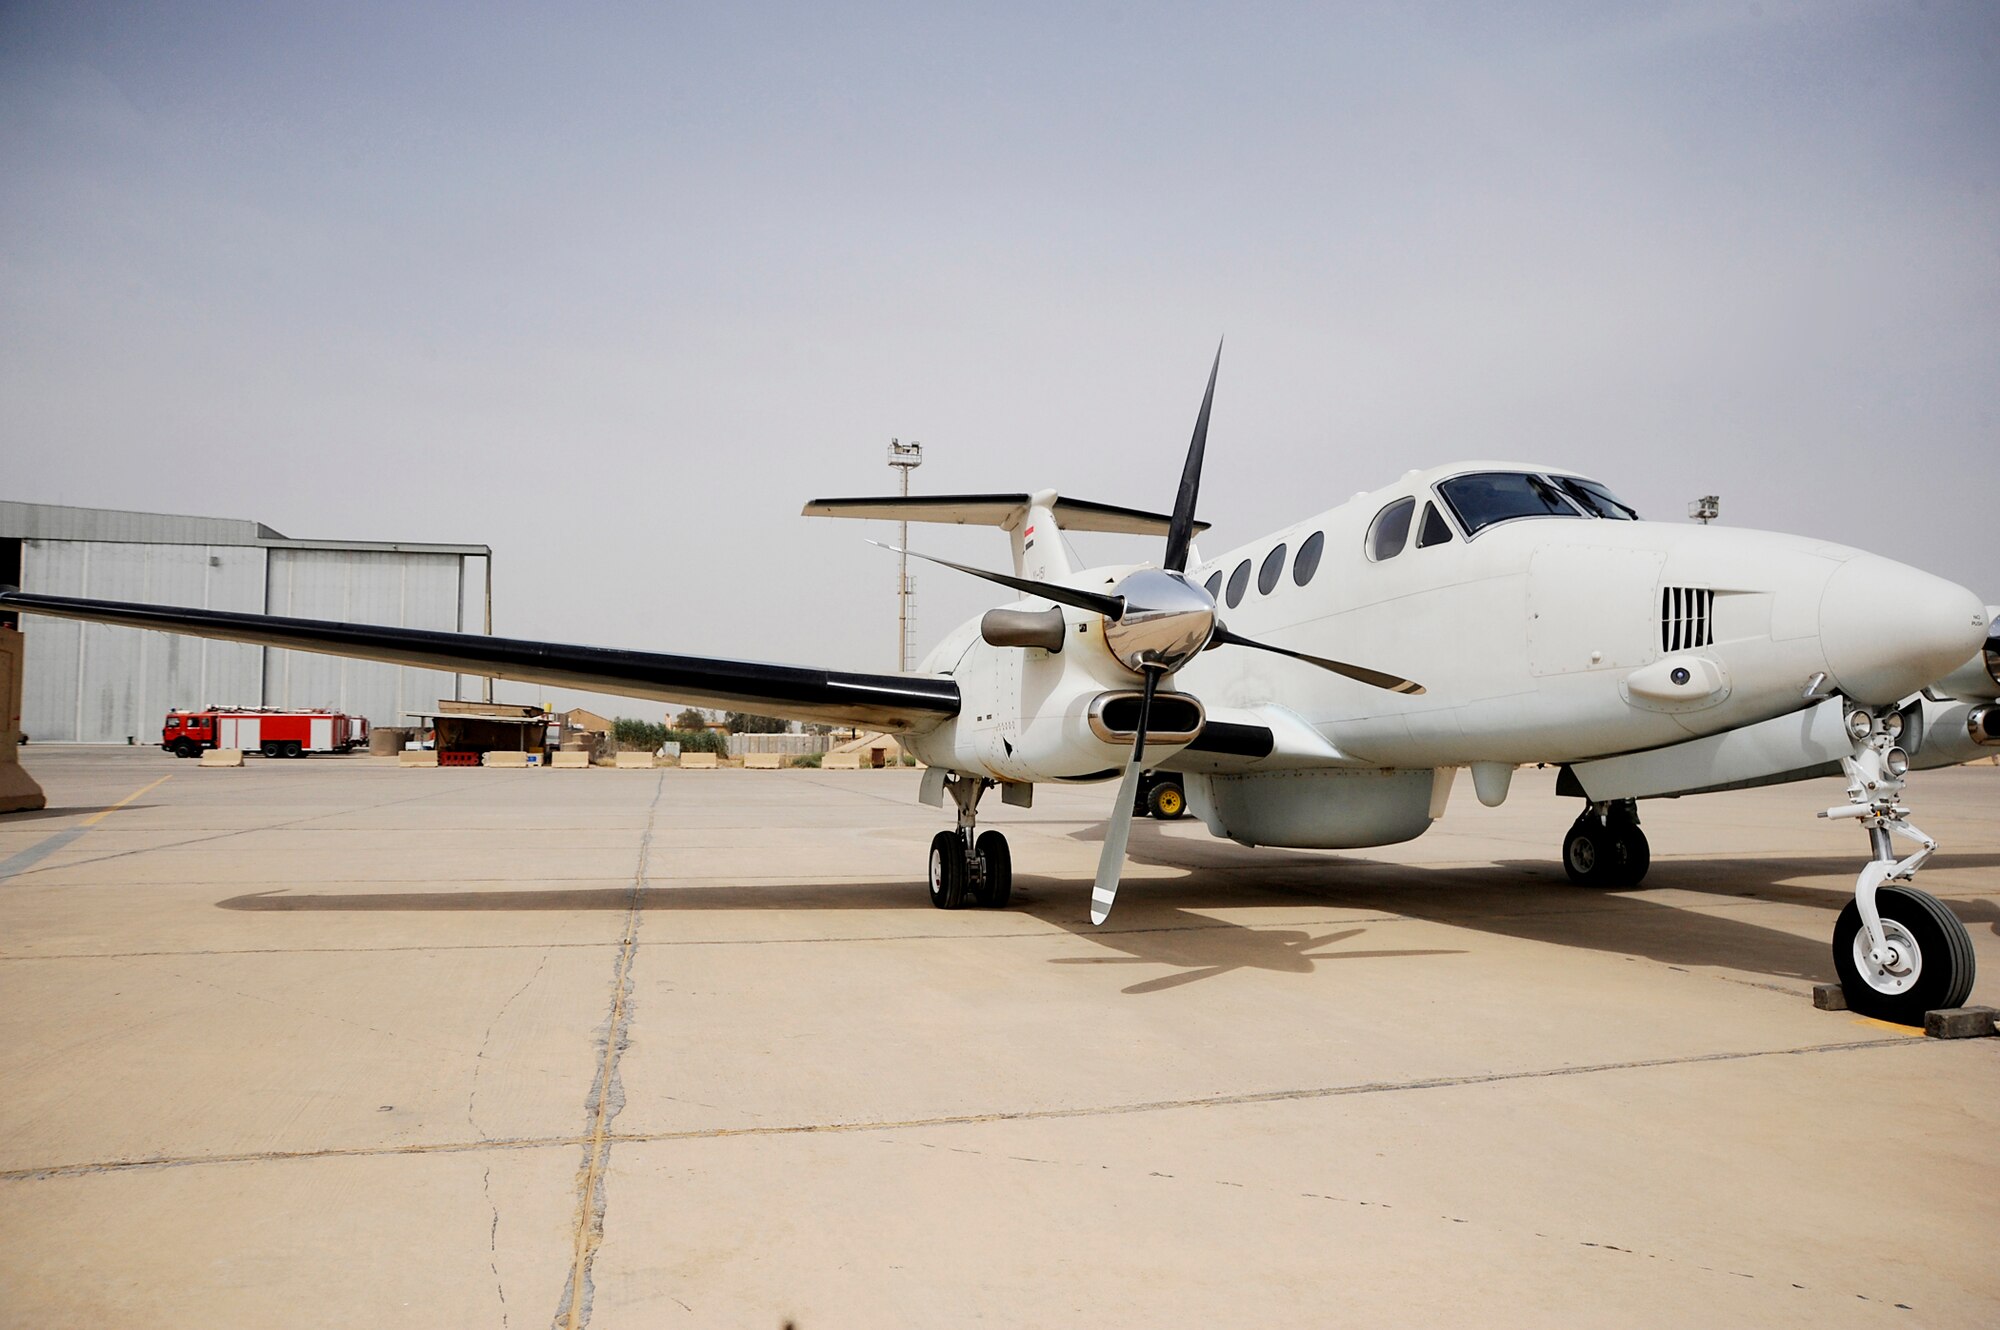 An Iraqi air force King Air 350 sits on the airfield at Al Muthana Air Base, Iraq, May 8. The airplane is assigned to the Iraqi air force's King Air Squadron 87 and boasts the intelligence, surveillance and reconnaissance capabilities necessary for the detection and deterrence of insurgent activity. (U.S. Air Force photo/Staff Sgt. Shawn Weismiller) 